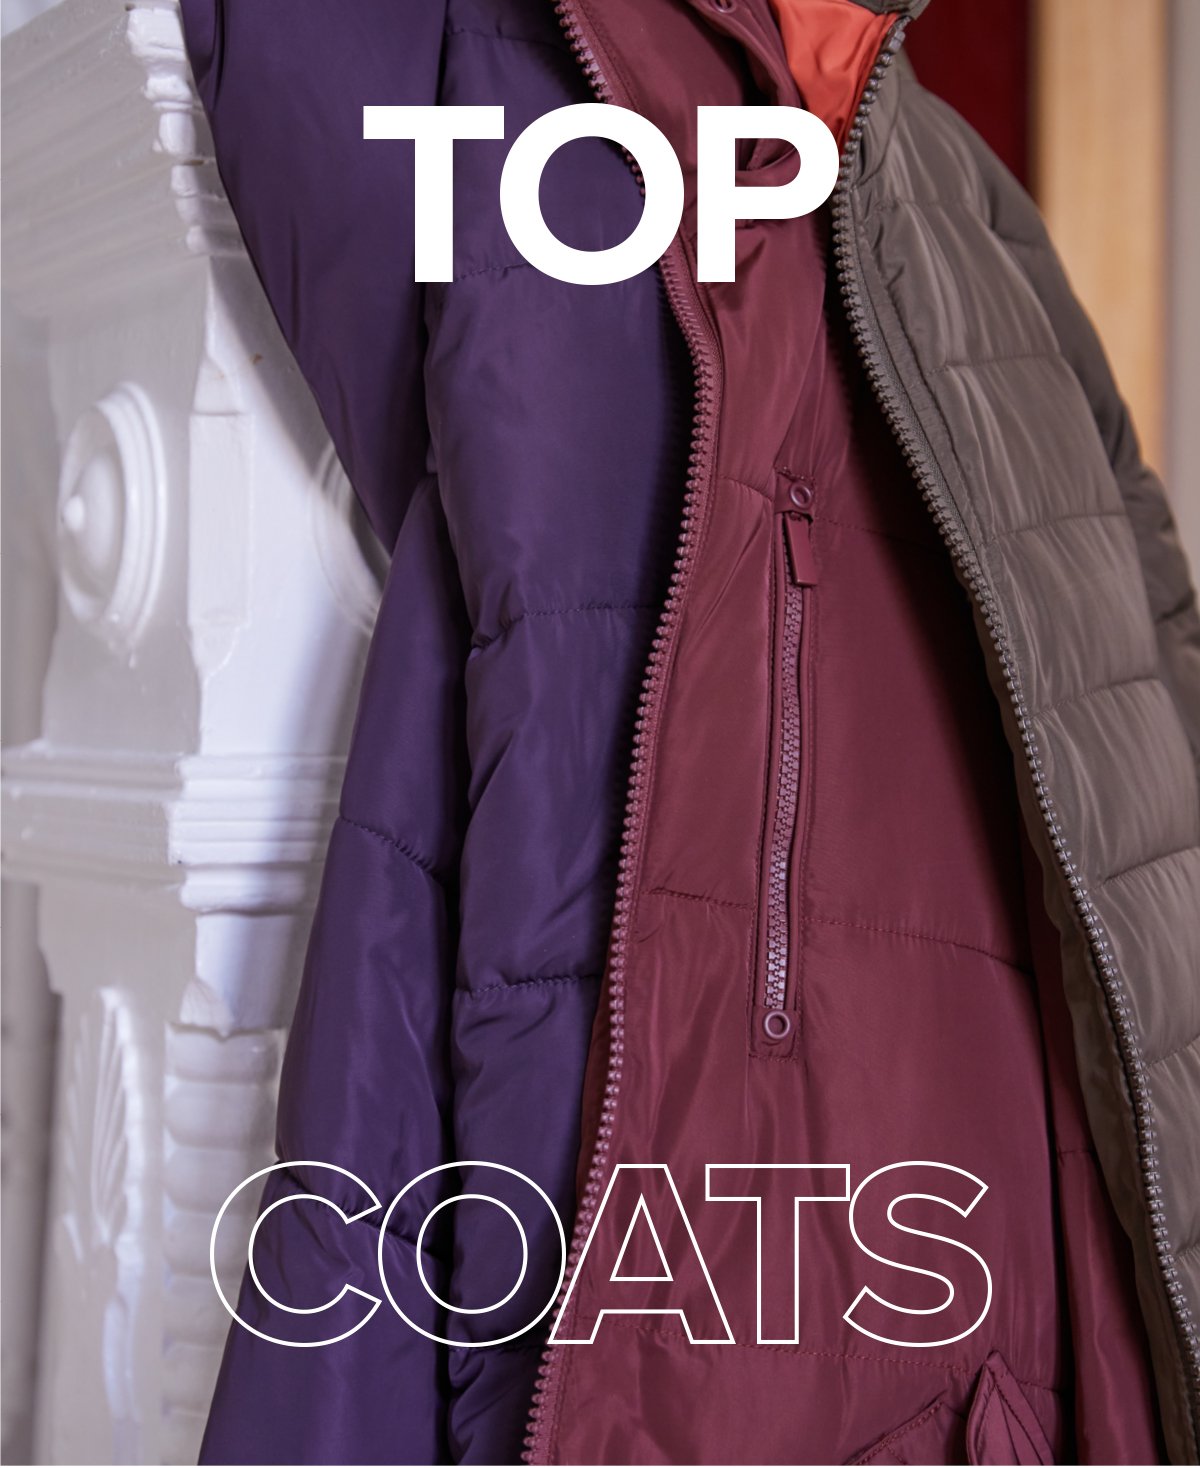 Our Top Coats